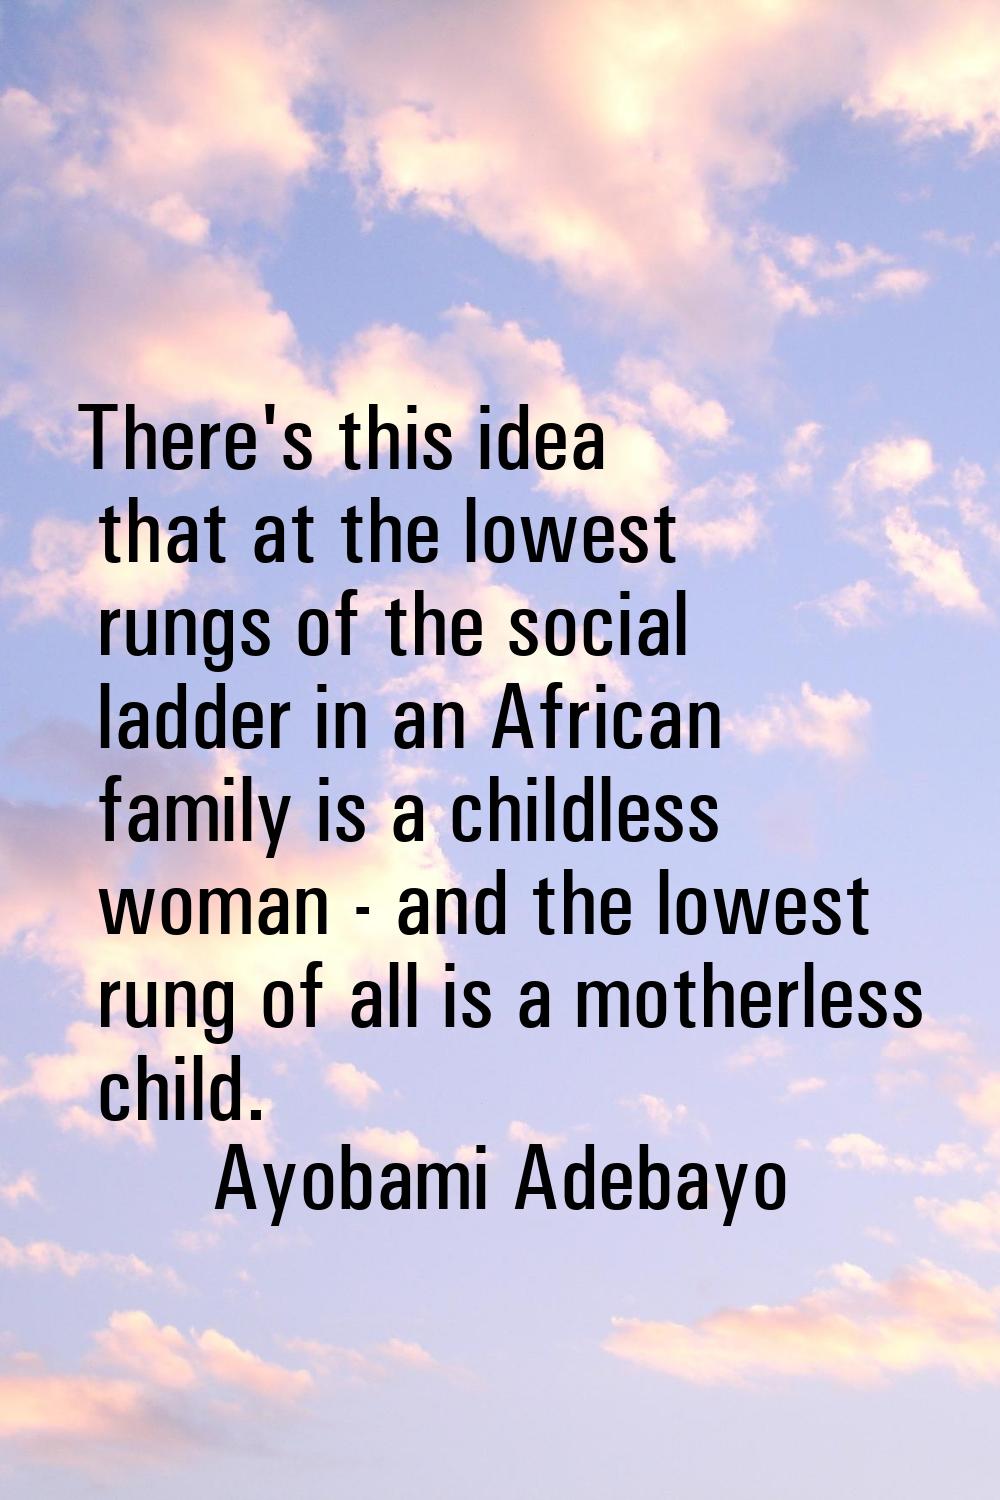 There's this idea that at the lowest rungs of the social ladder in an African family is a childless